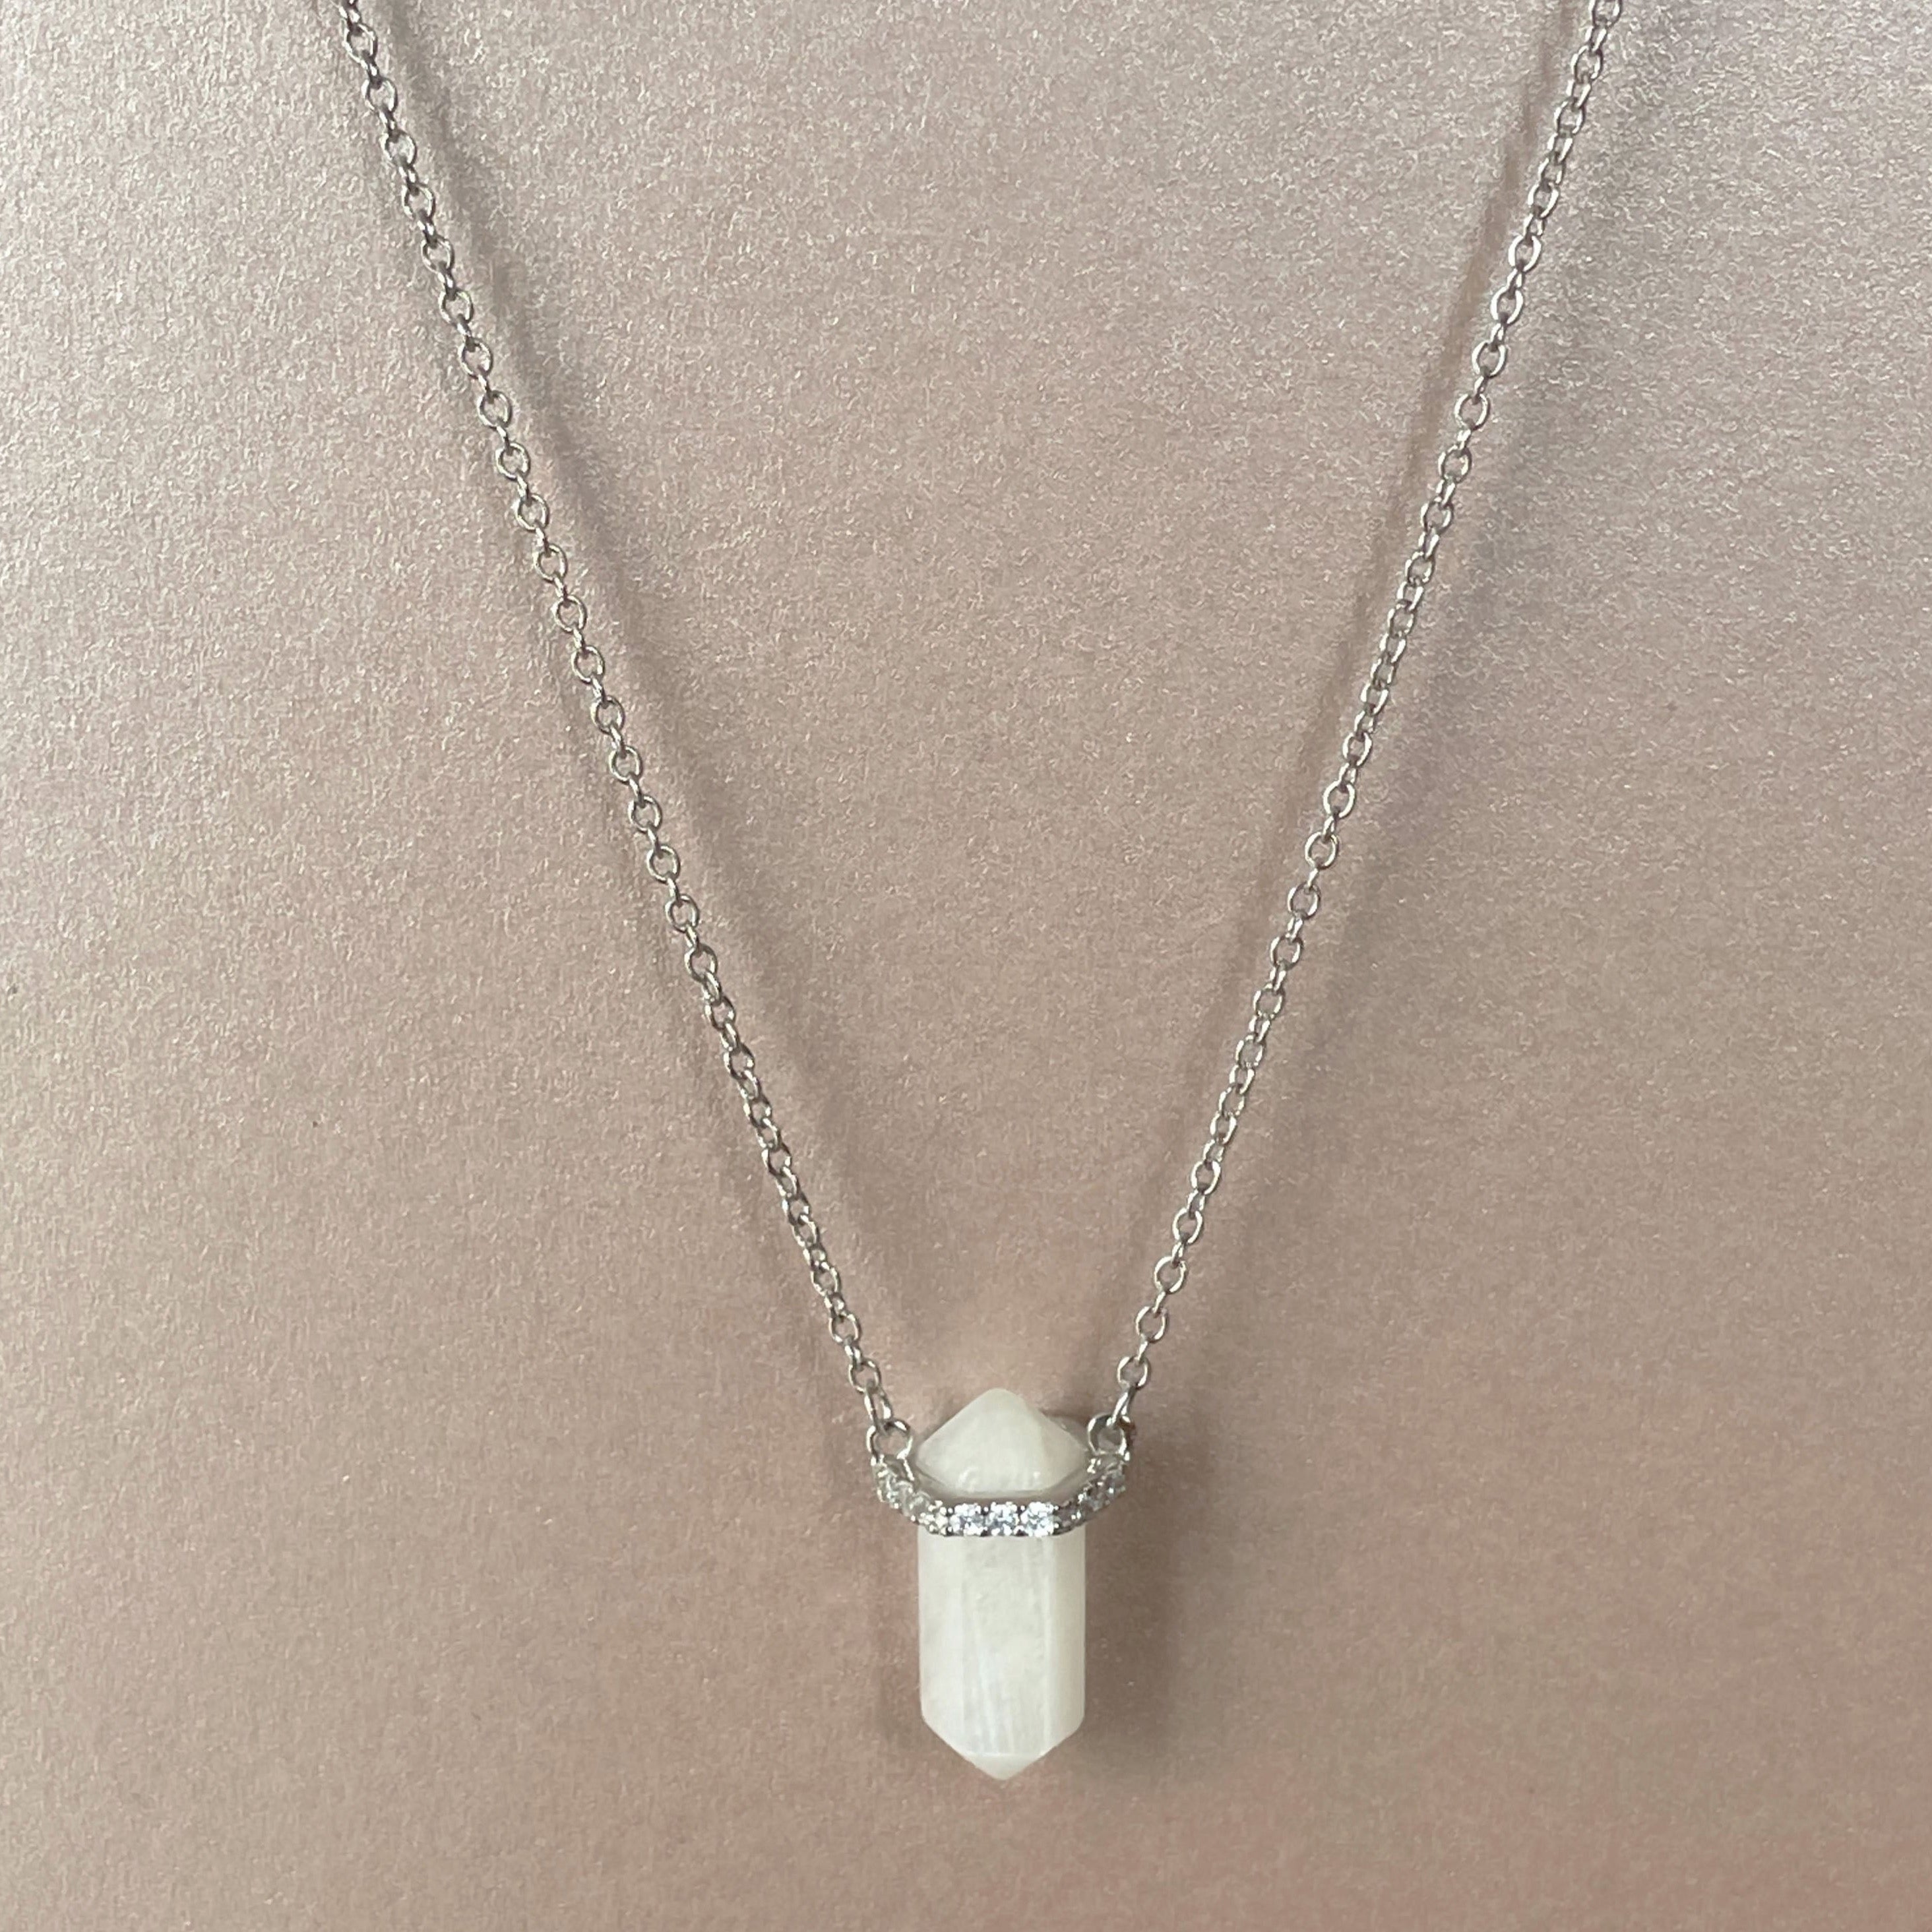 Luna Luxe Sterling Silver Moonstone Necklace